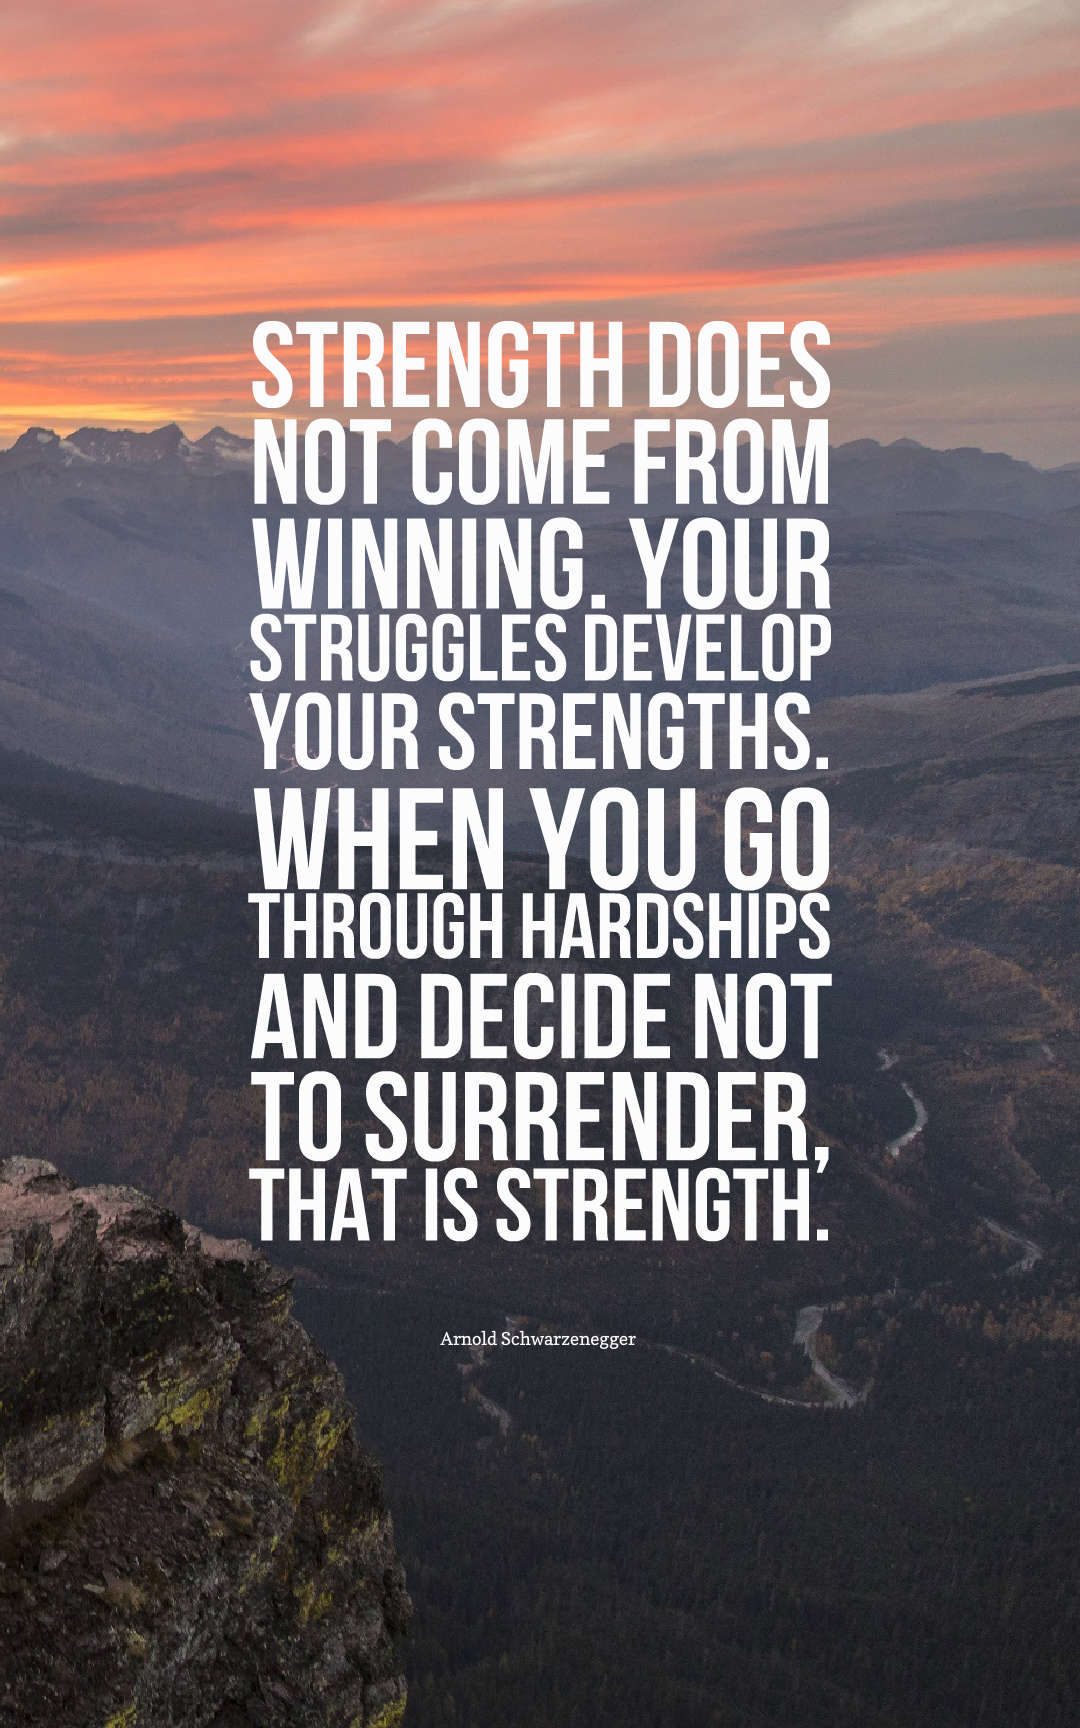 Strength does not come from winning.